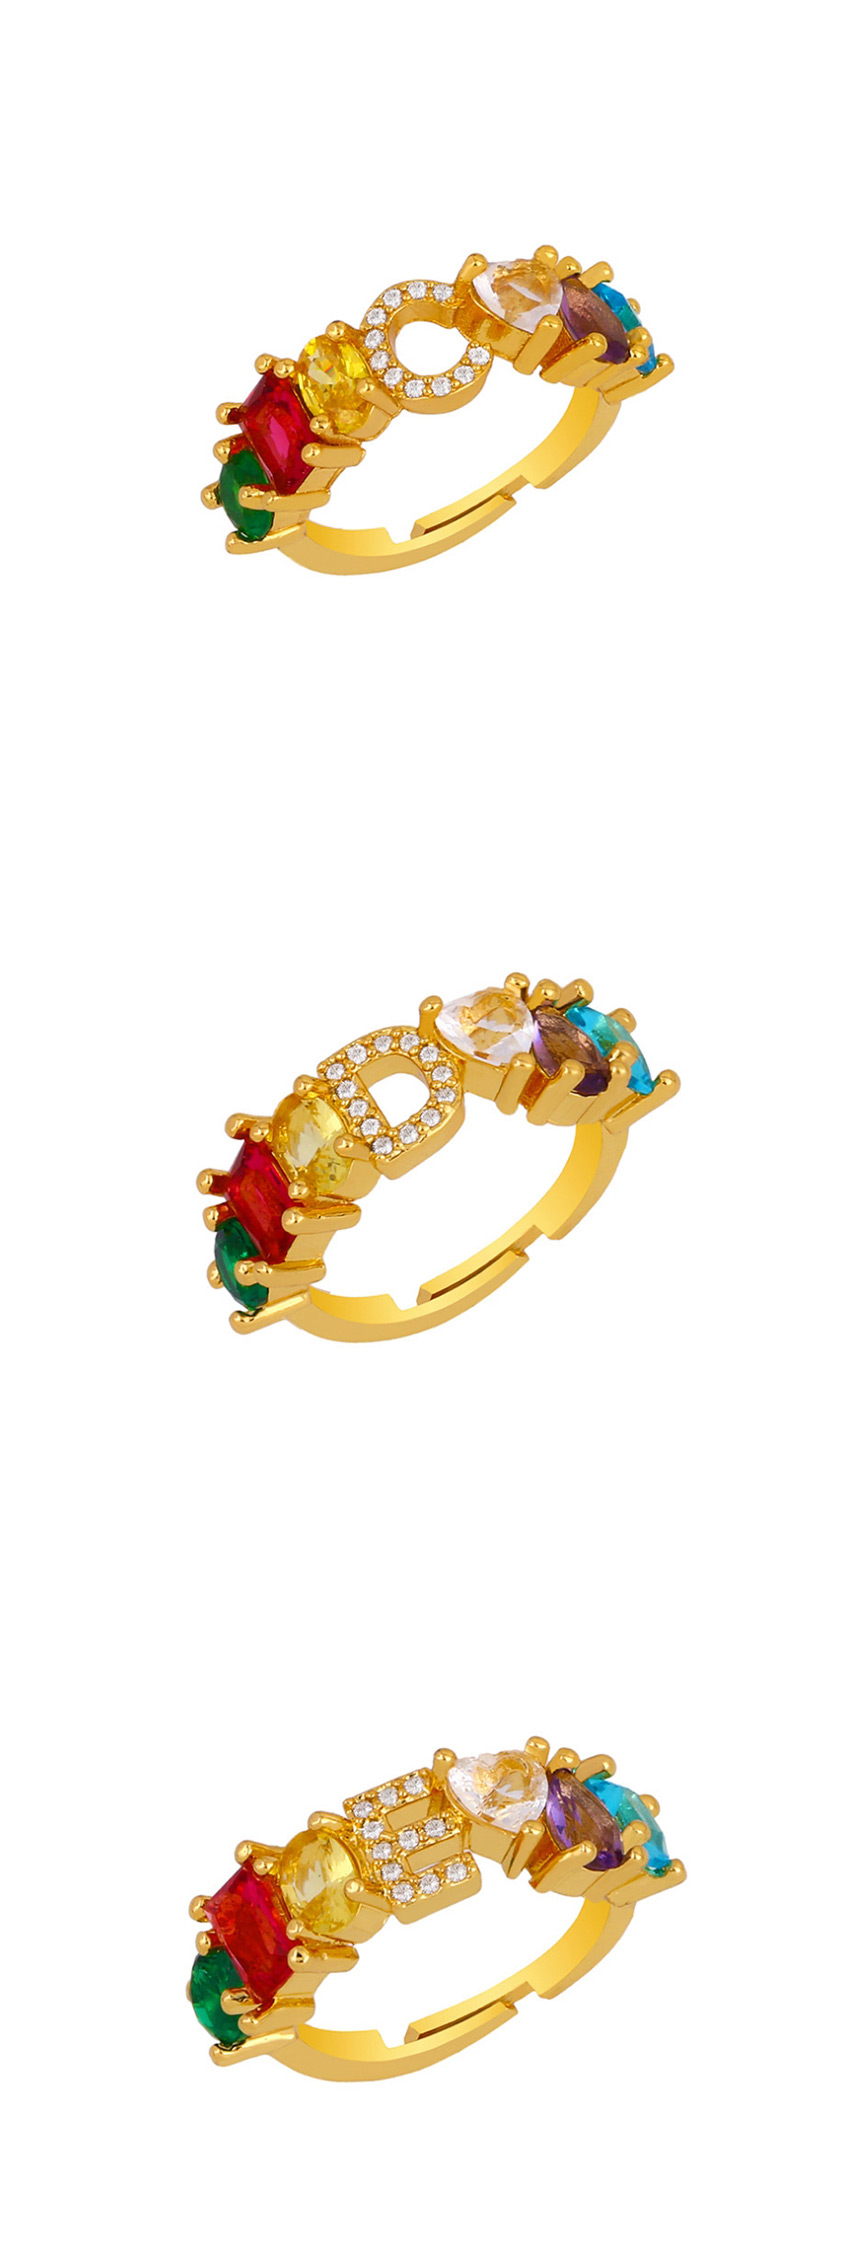 Fashion R Gold Heart-shaped Adjustable Ring With Colorful Diamond Letters,Rings